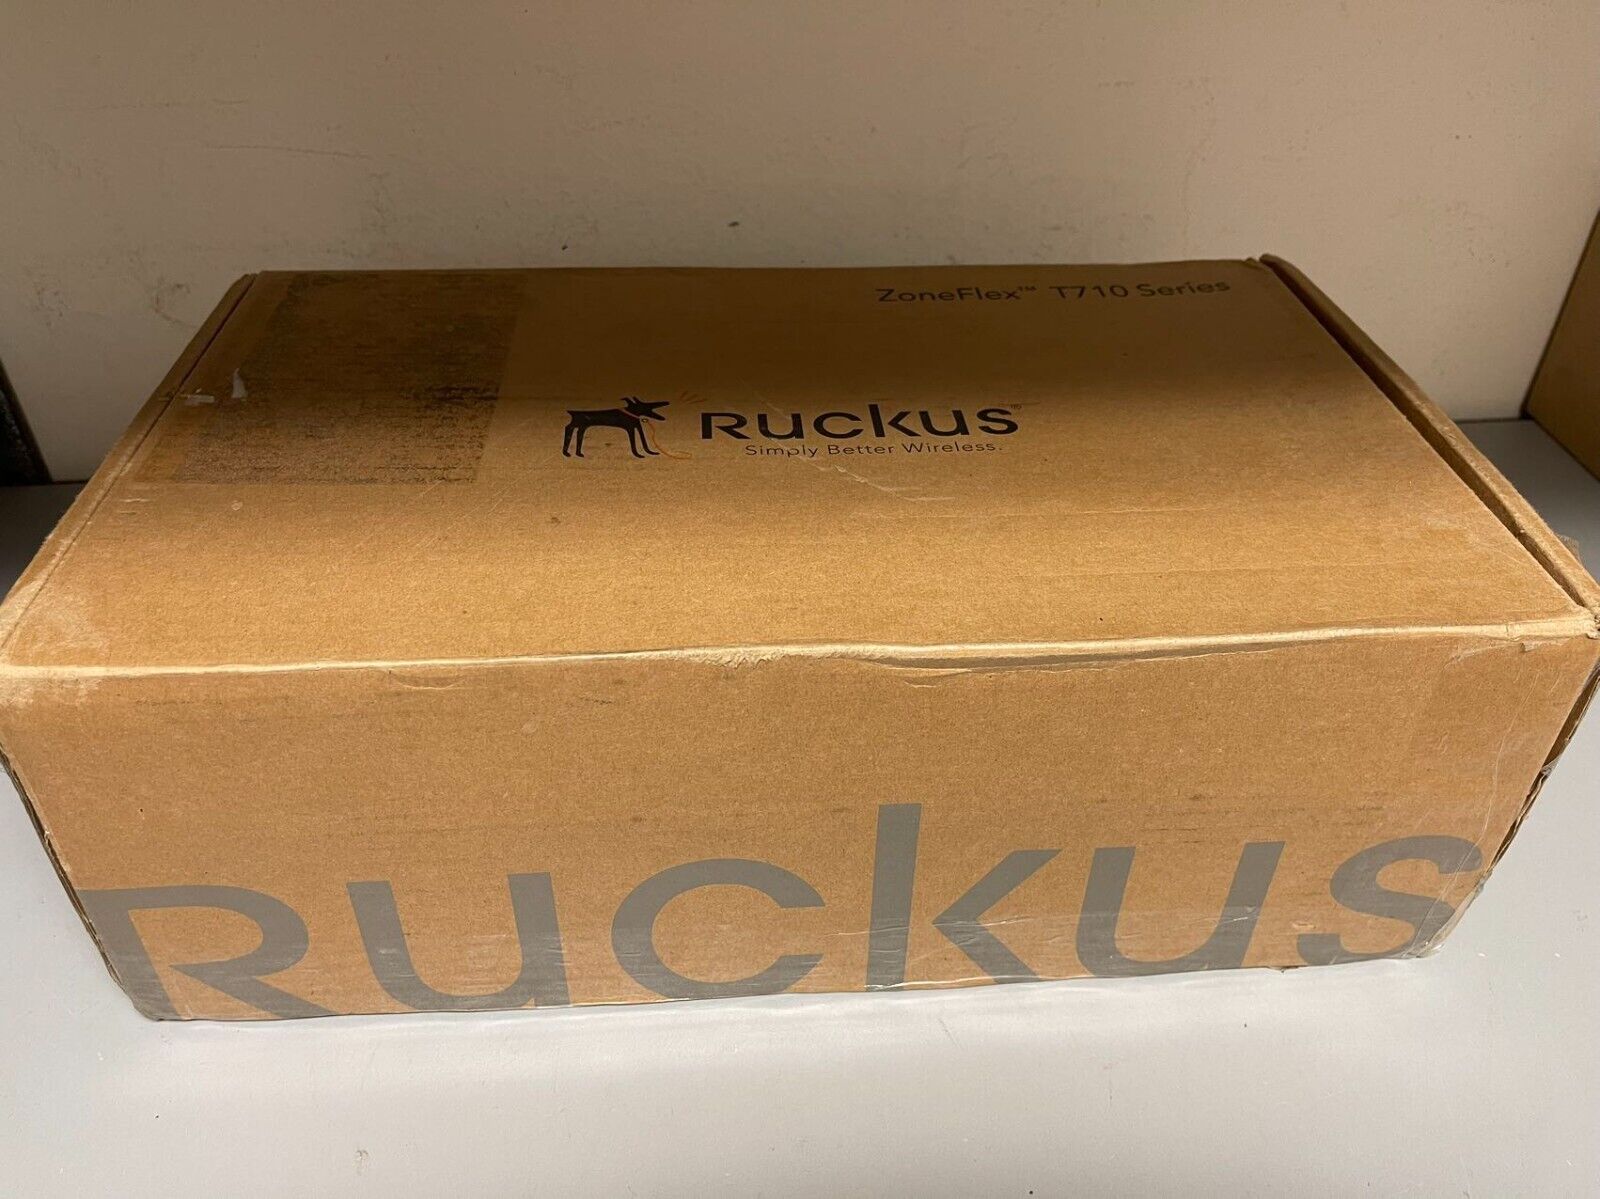 New Ruckus T710 wireless access point Unleashed P/N: 901-T710-US01